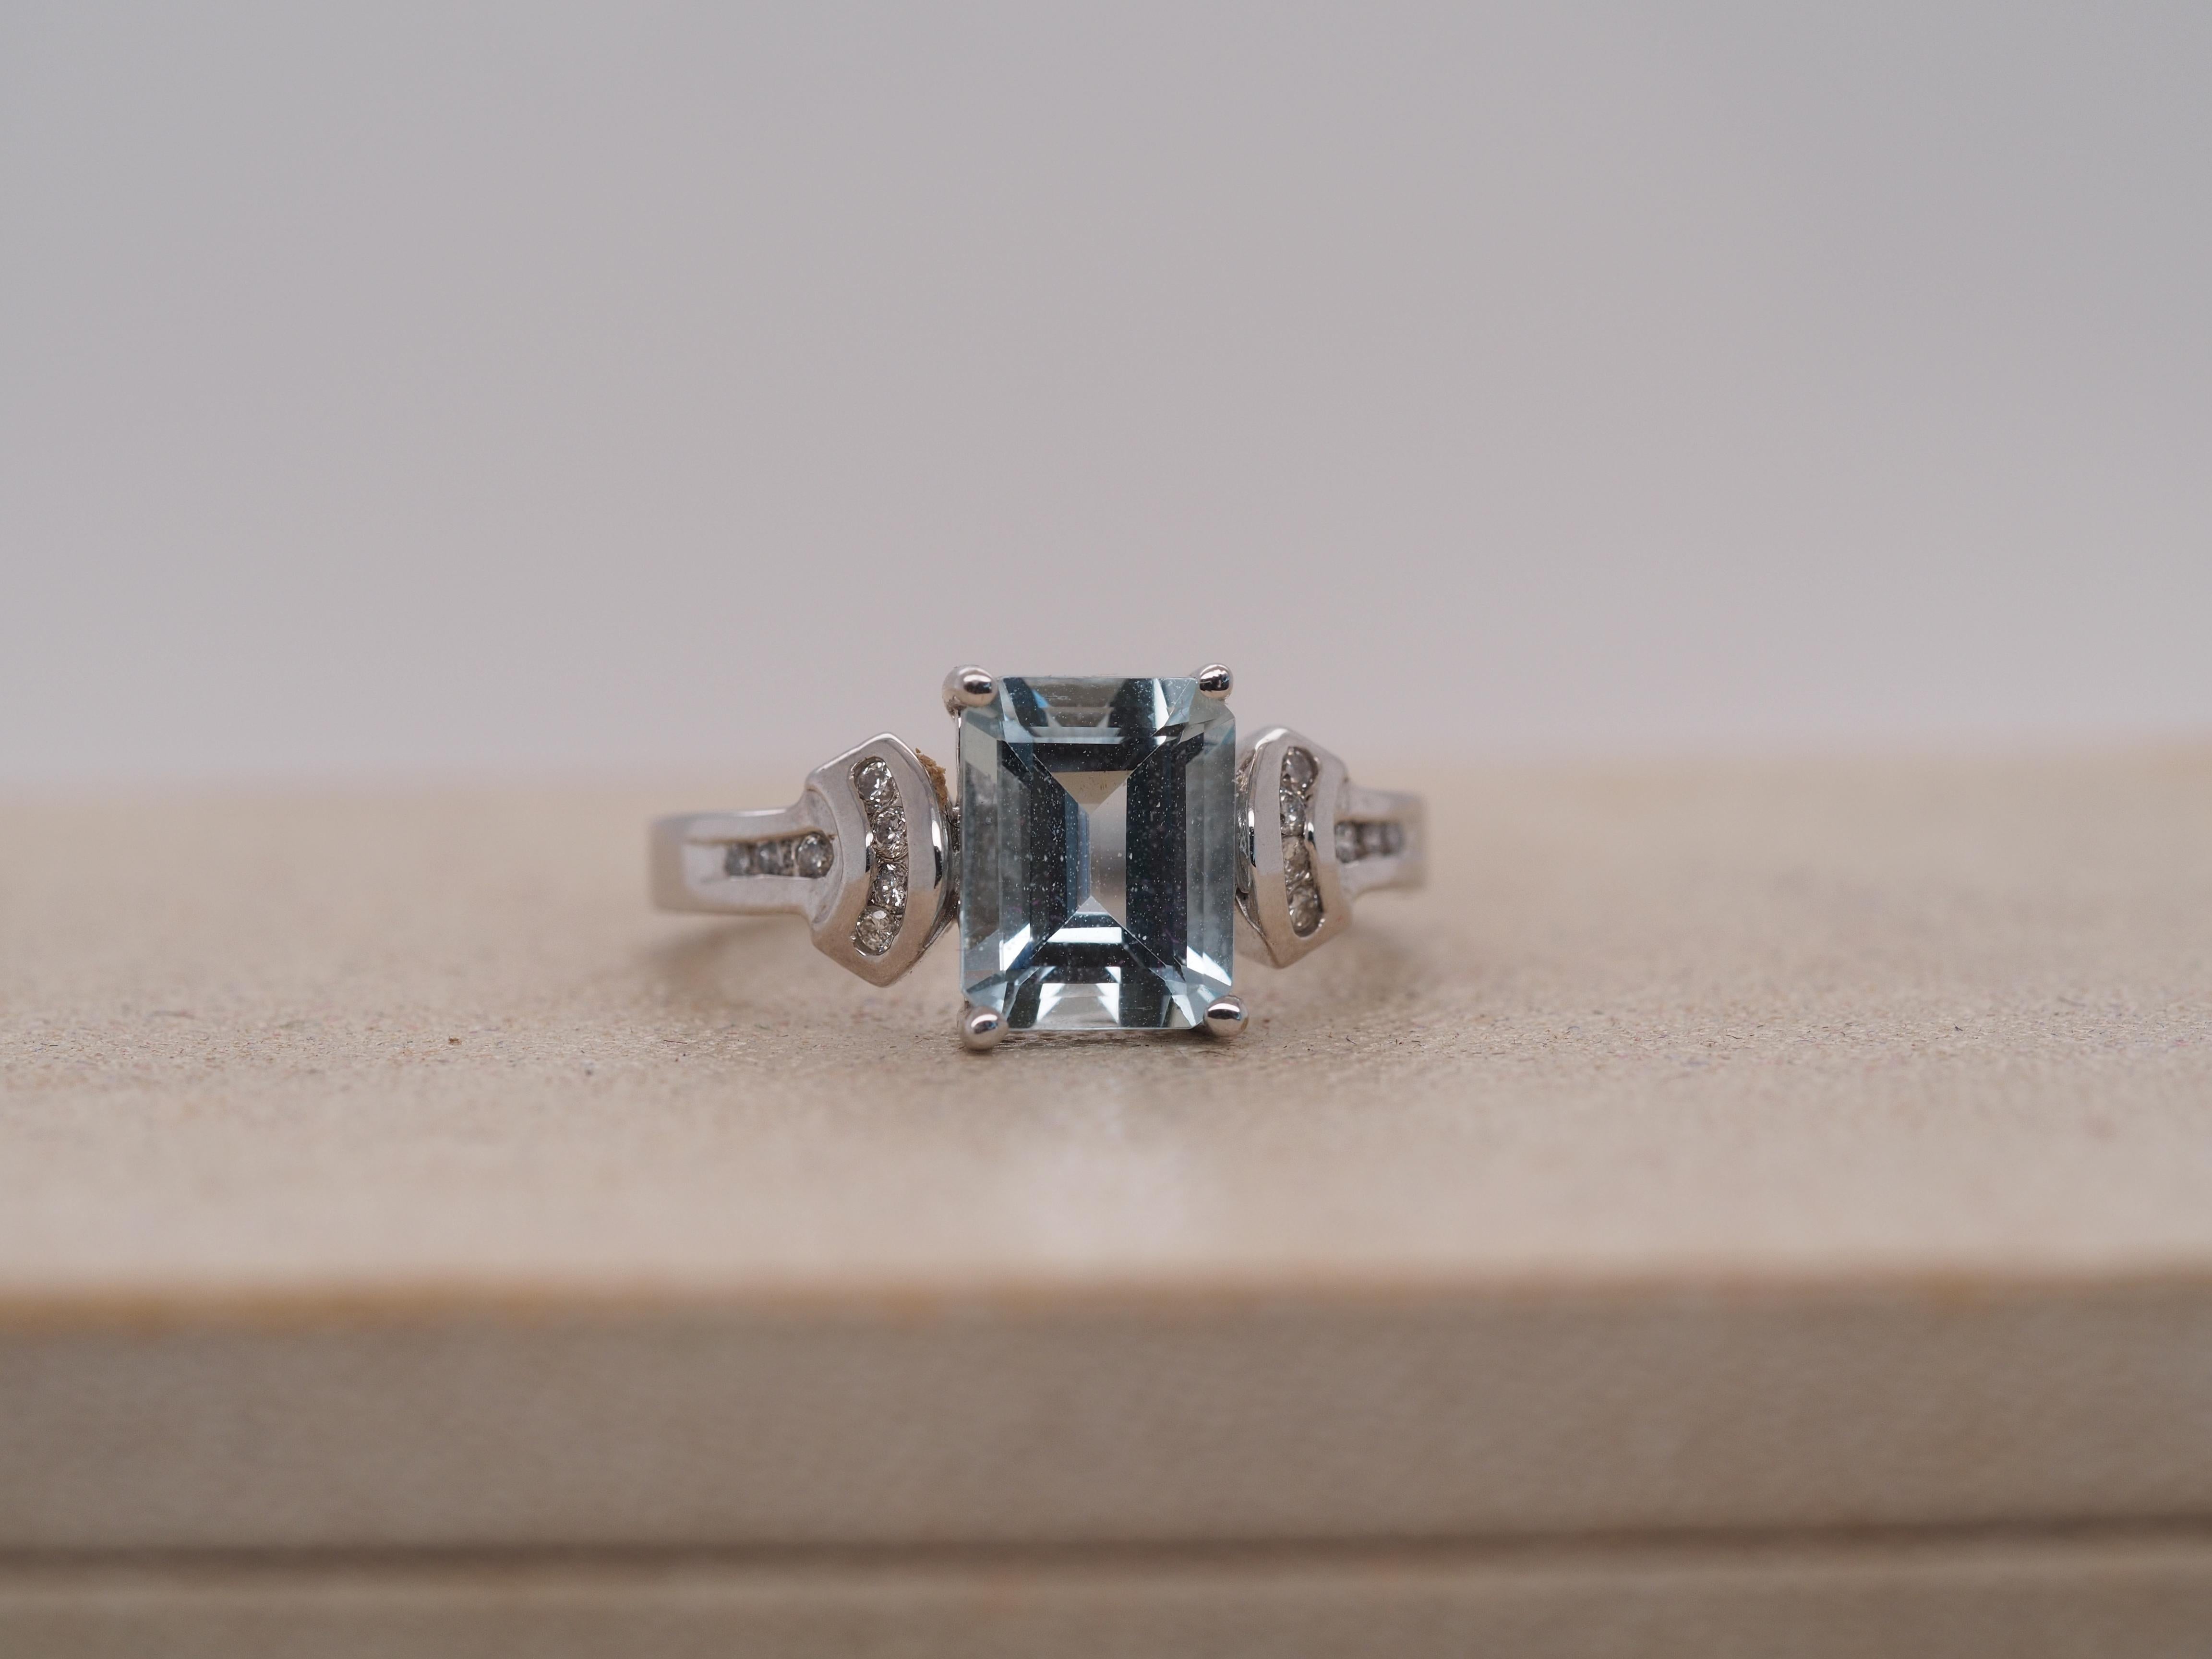 Year: 2000s
Item Details:
Ring Size: 7
Metal Type: 14k White Gold [Hallmarked, and Tested]
Weight: 4.2grams
Band Width: 2.3mm
Condition: Excellent